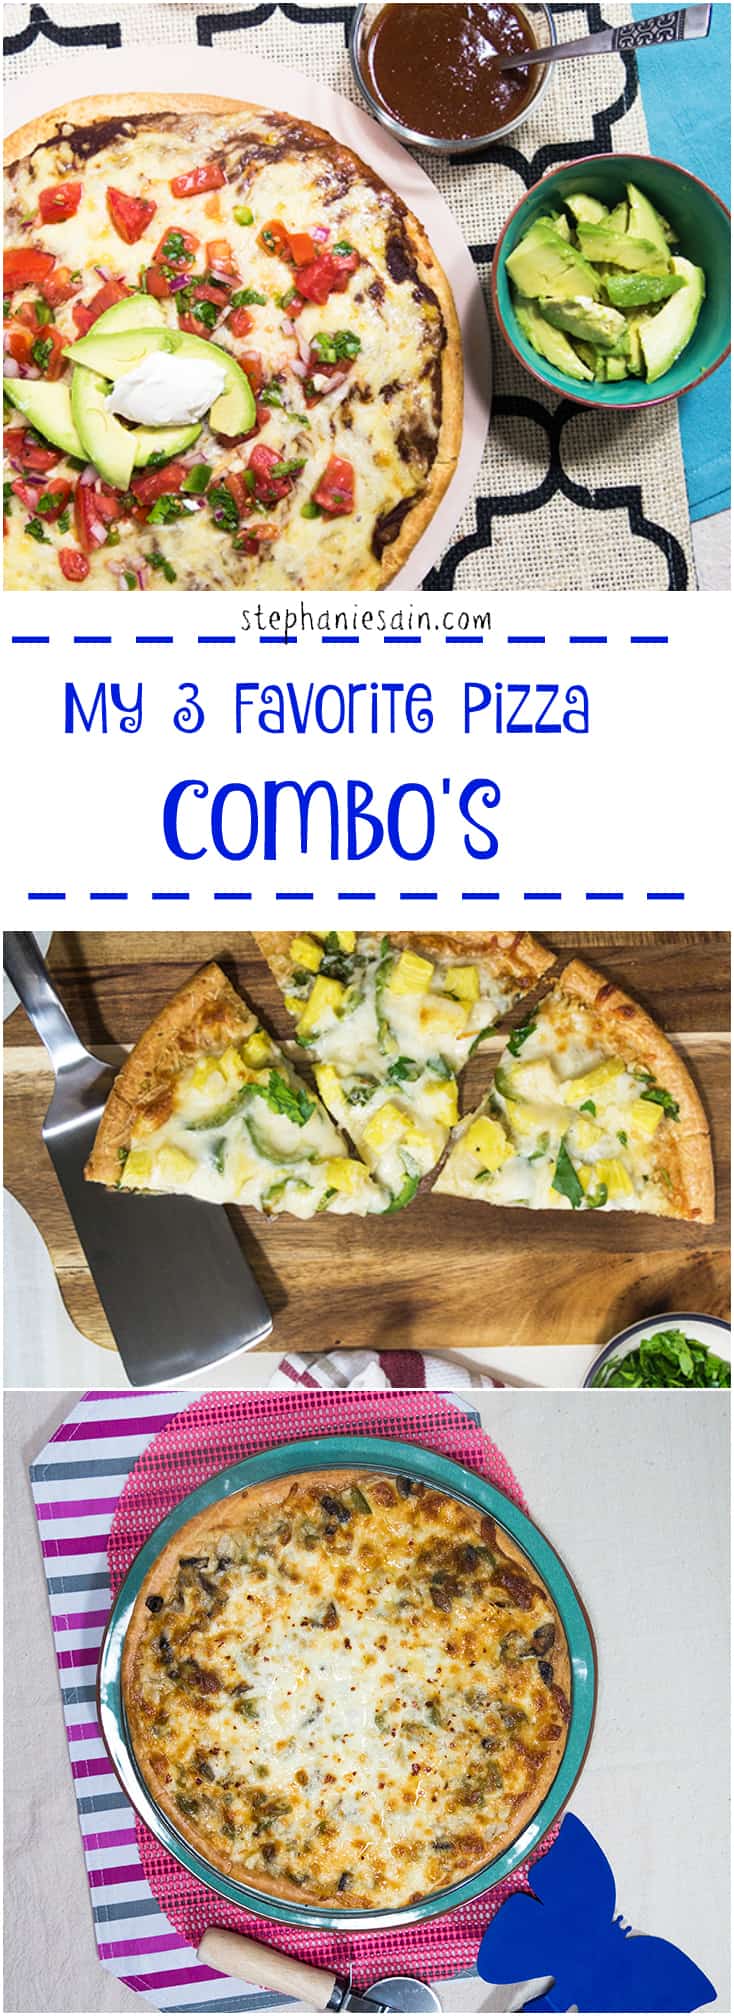 My Three Favorite Pizza Combinations is a collection of what I consider to be great tasting easy to prepare pizza. All are Vegetarian and Gluten Free.